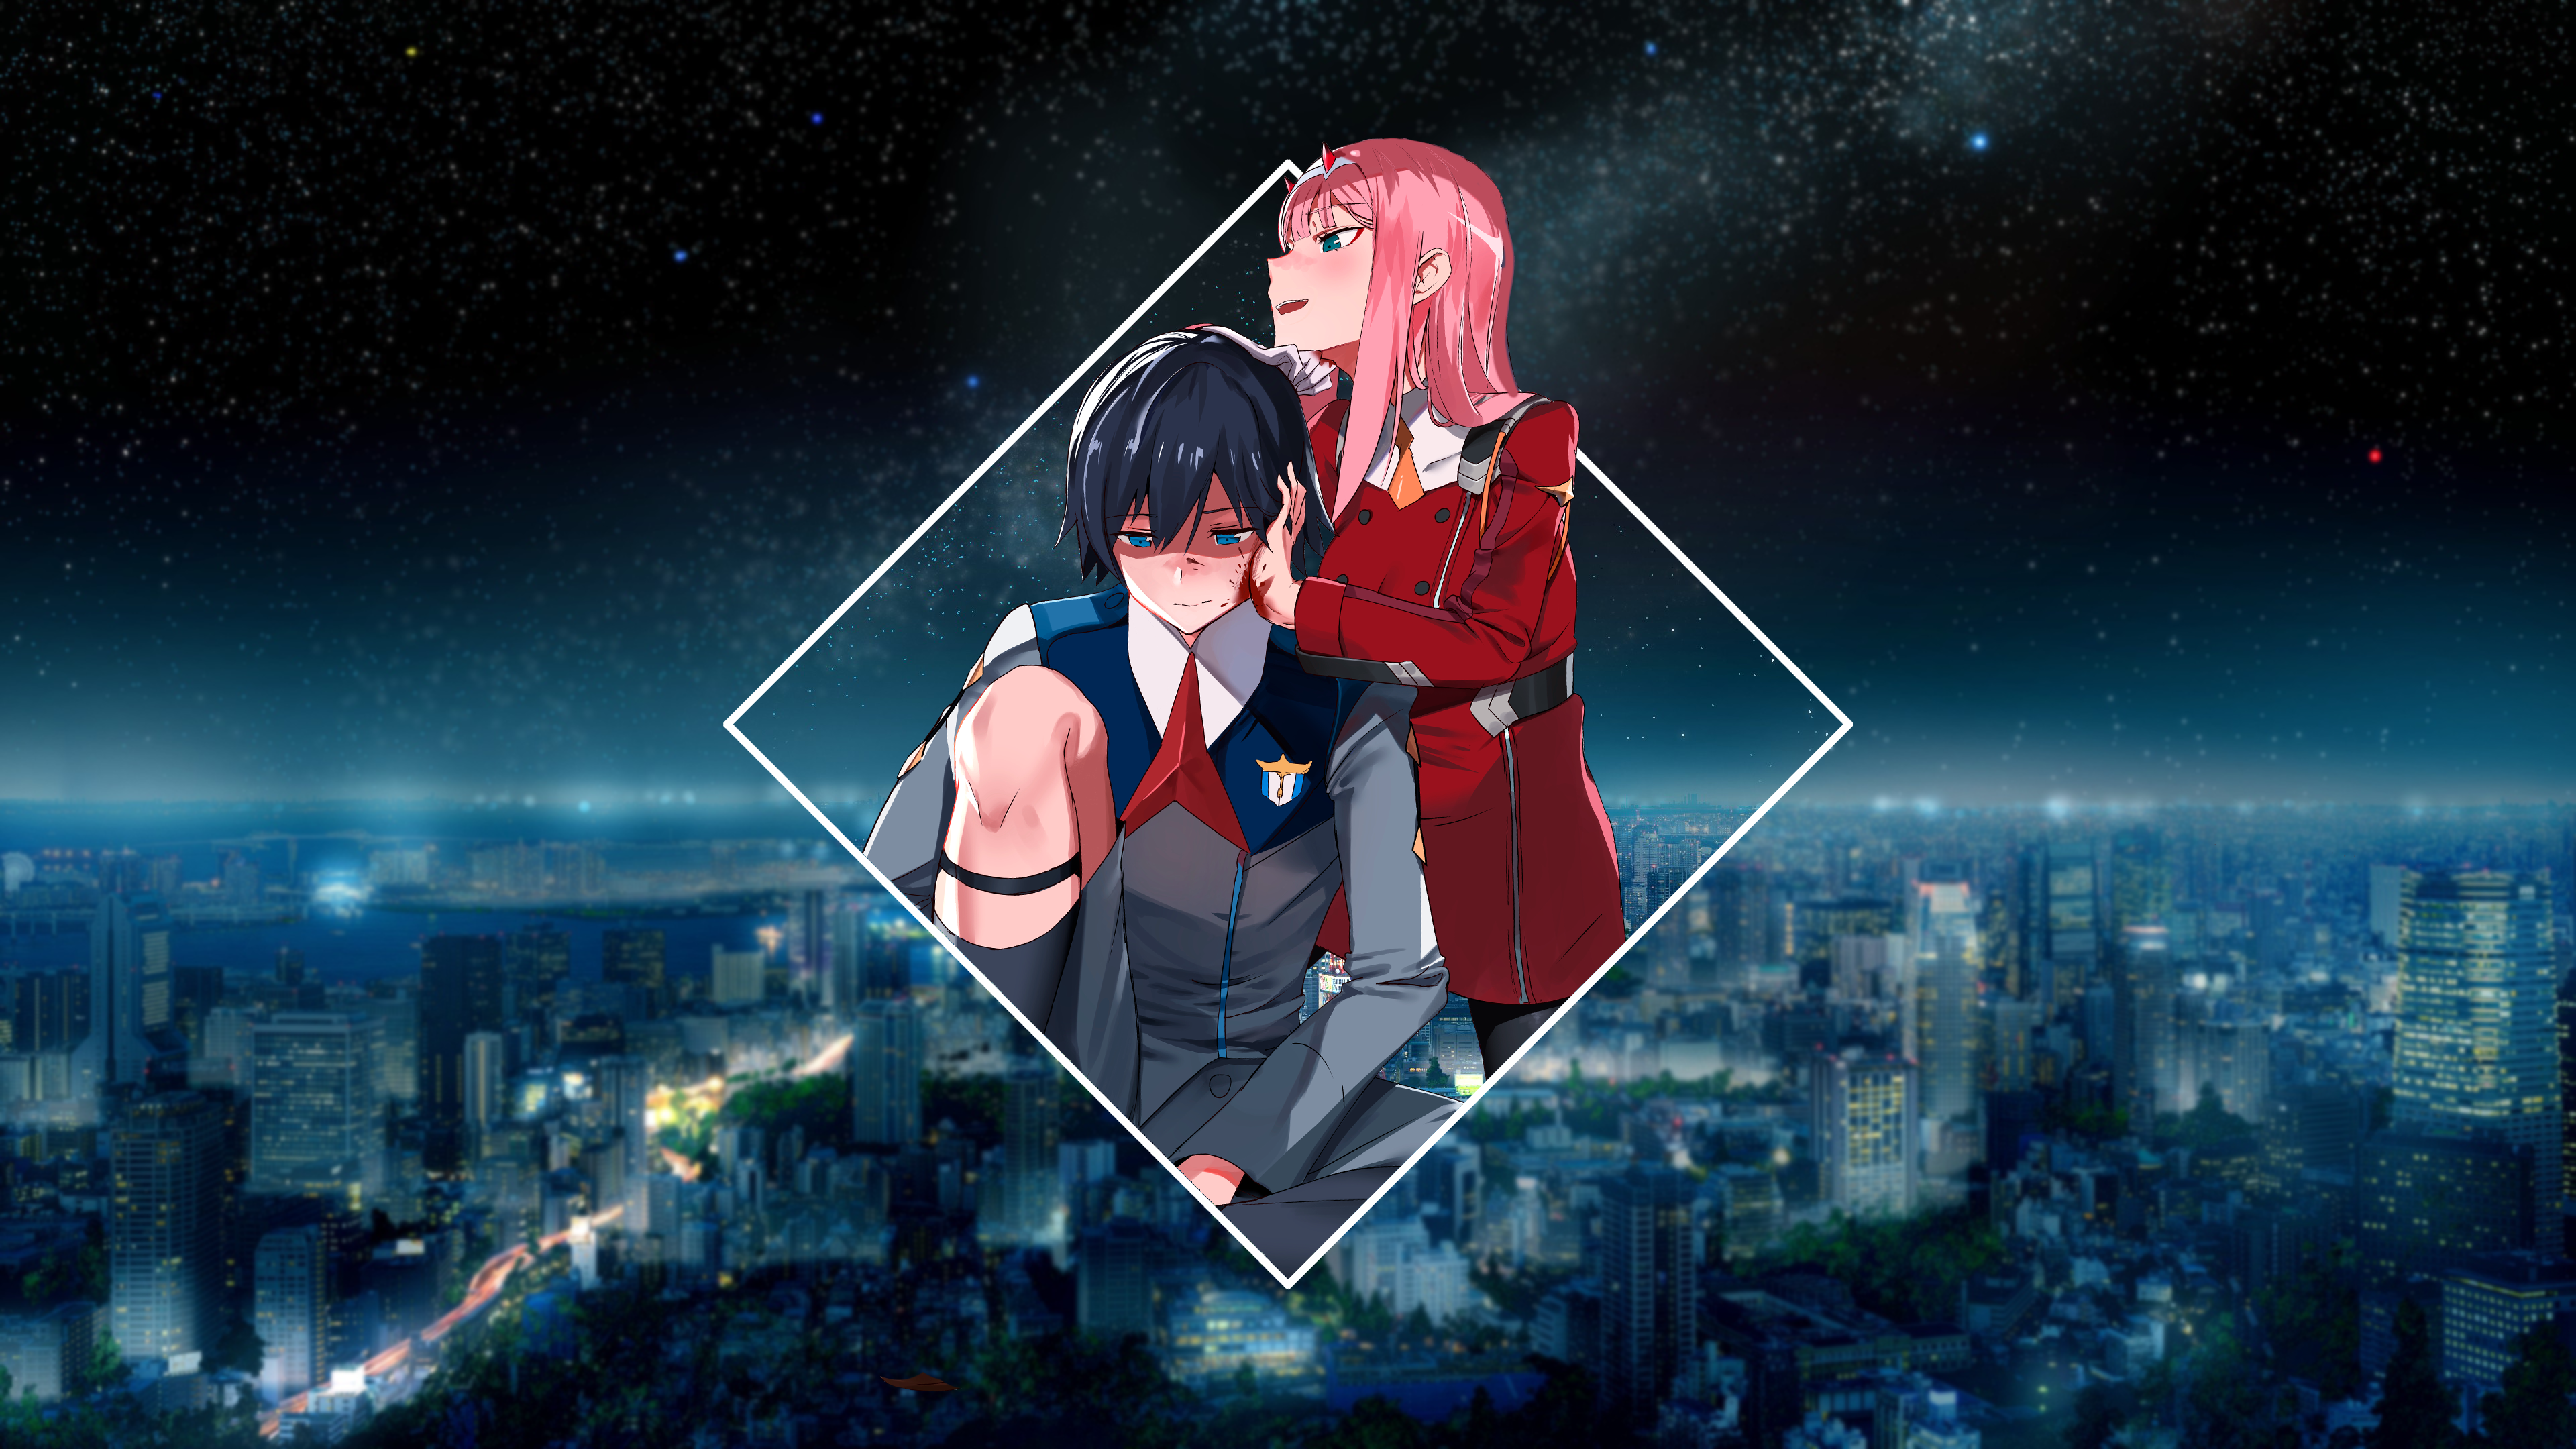 Anime 3840x2160 Zero Two (Darling in the FranXX) Darling in the FranXX Hiro (Darling in the FranXX) anime picture-in-picture